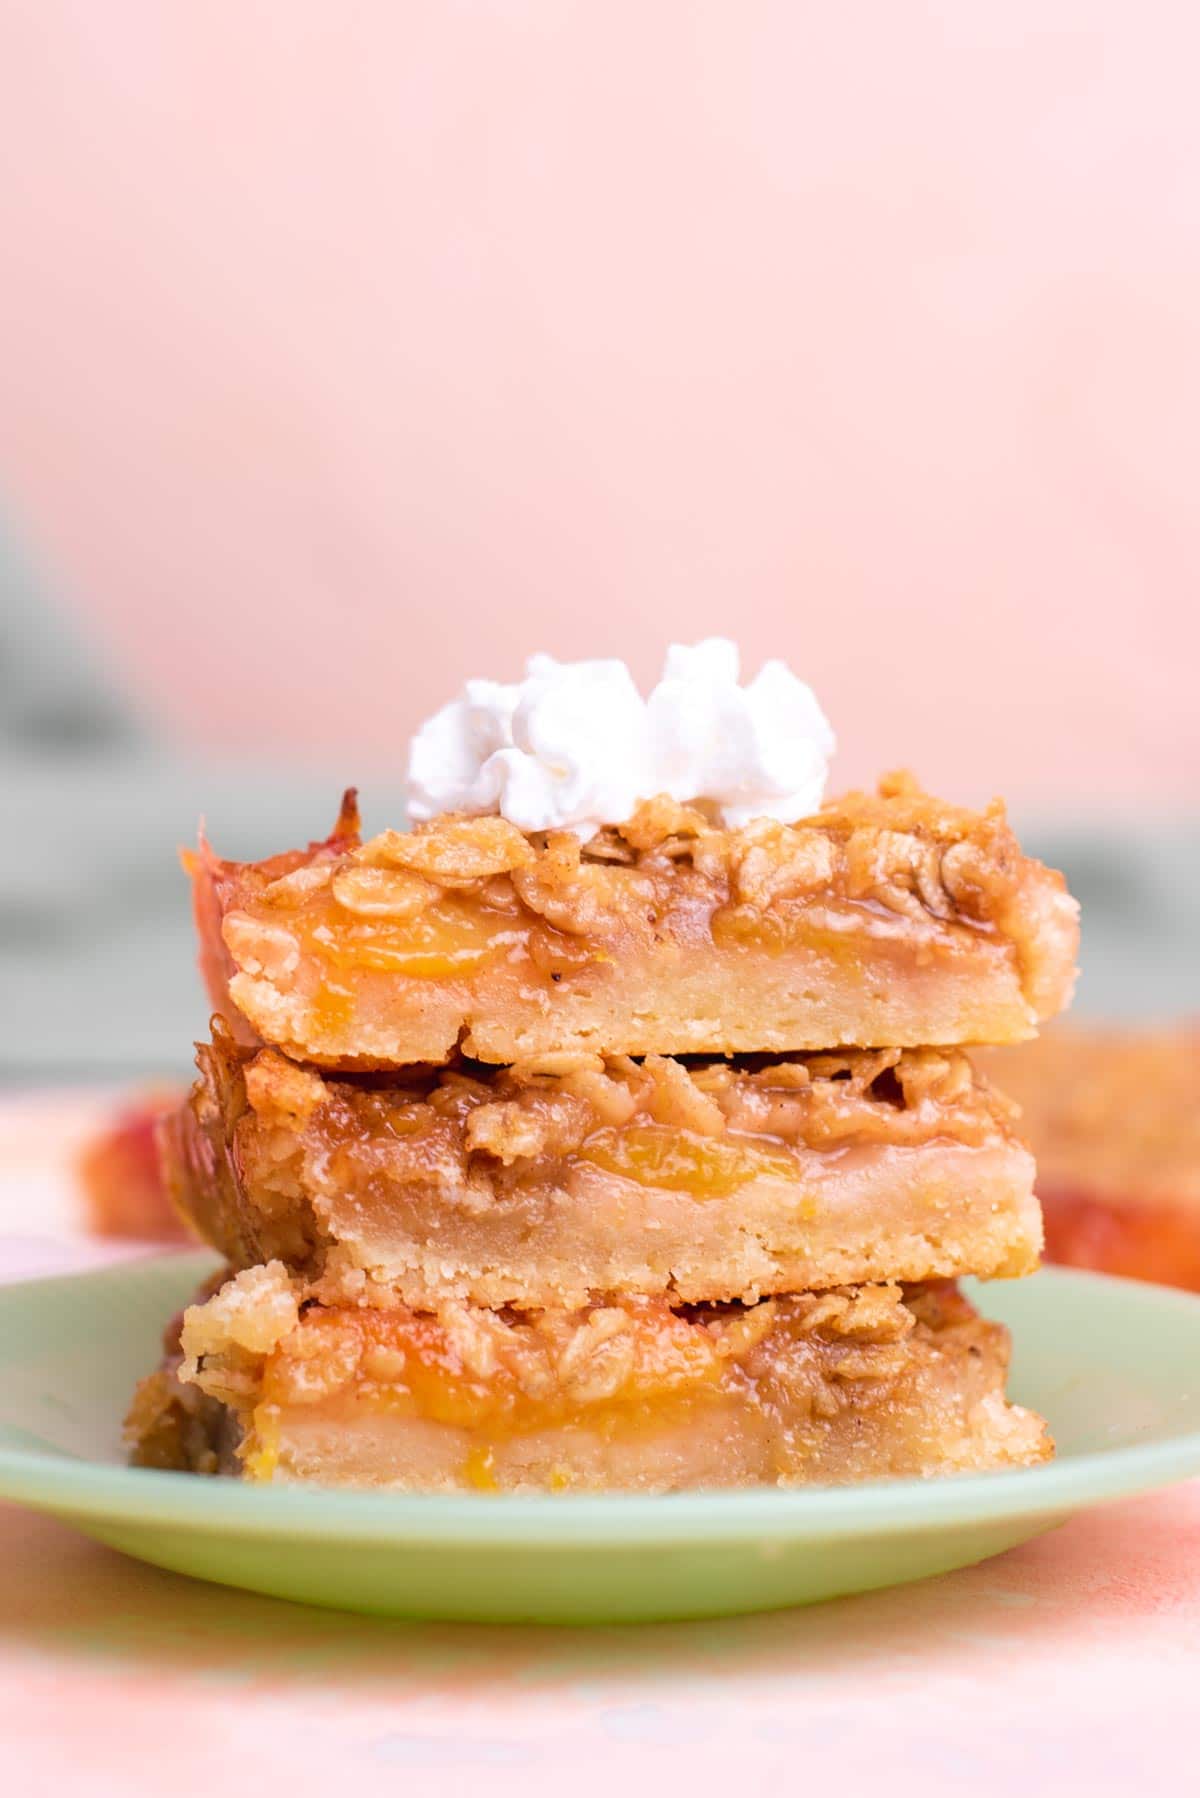 Three peach bars stacked on top of each other with a dollop of whipped cream on top